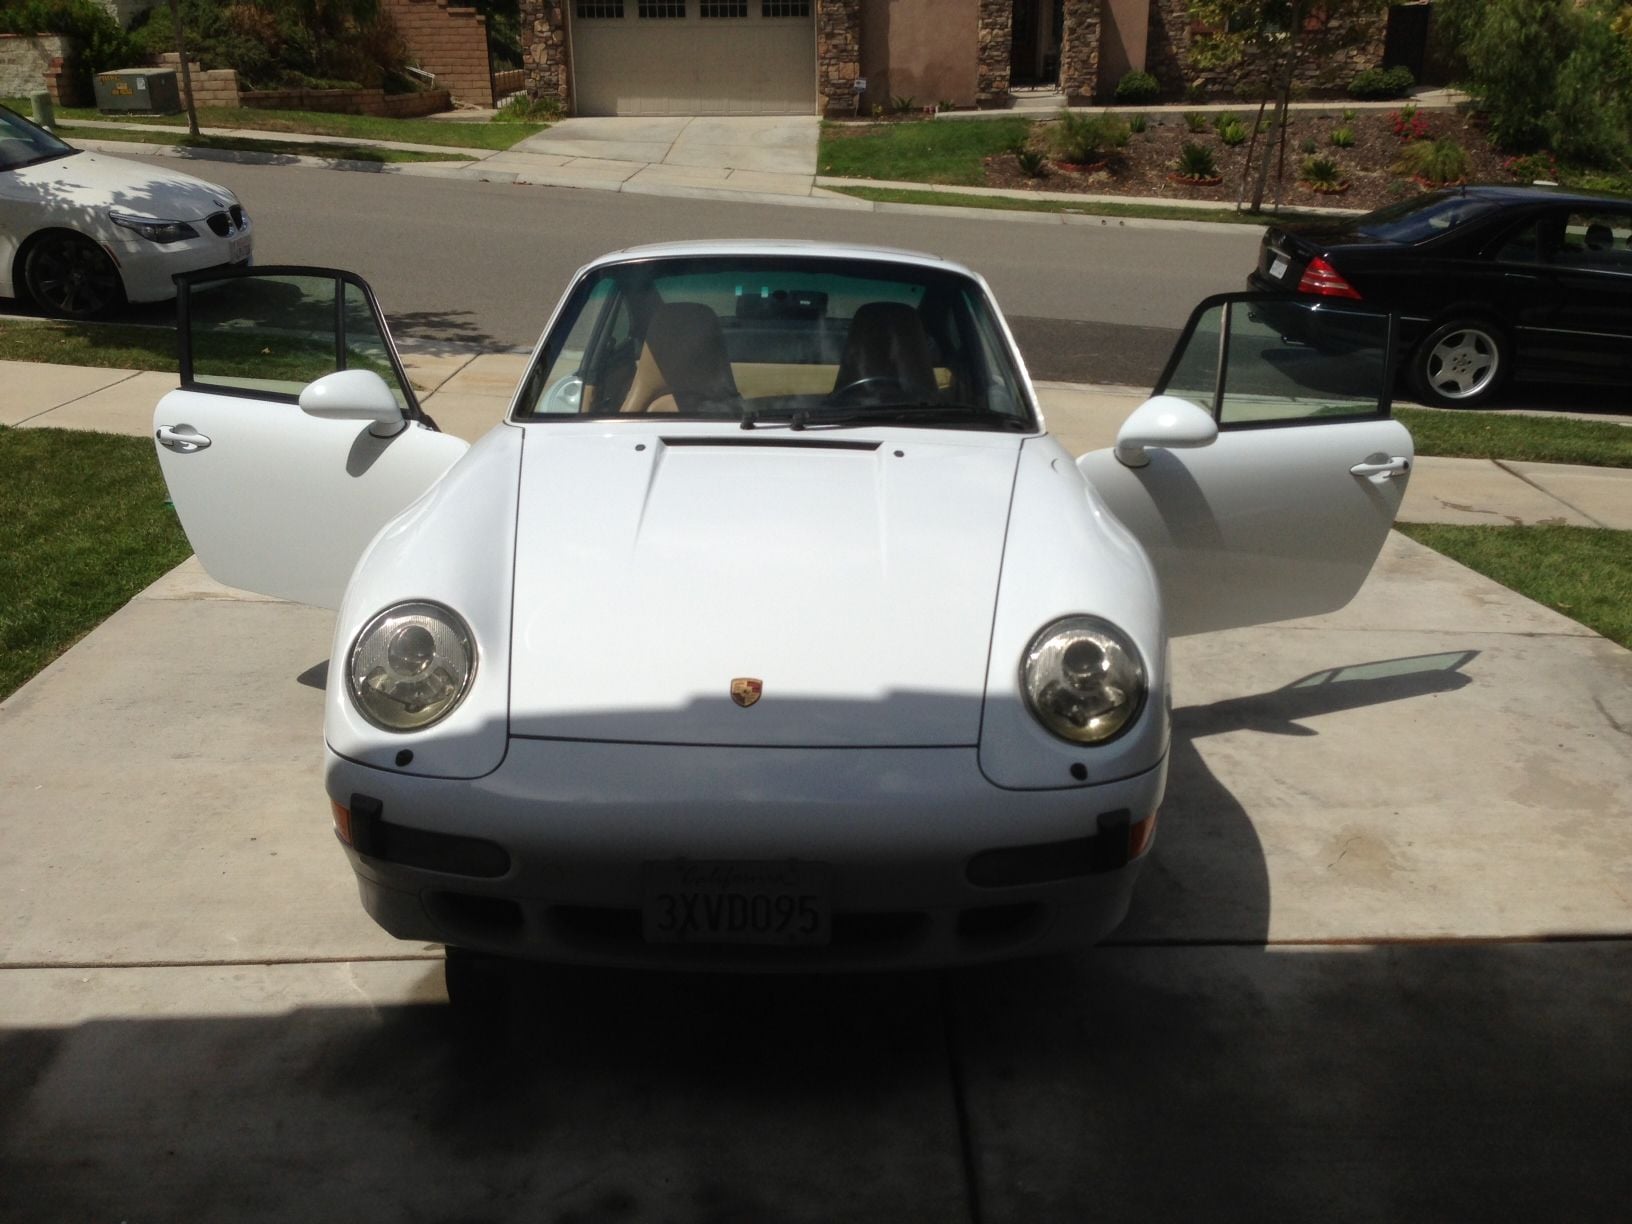 1998 Porsche 911 - 1998 C2S 993 - 6 Speed - Used - VIN WP0AA2998WS320095 - 123,000 Miles - 6 cyl - 2WD - Manual - Coupe - White - Corona, CA 92883, United States